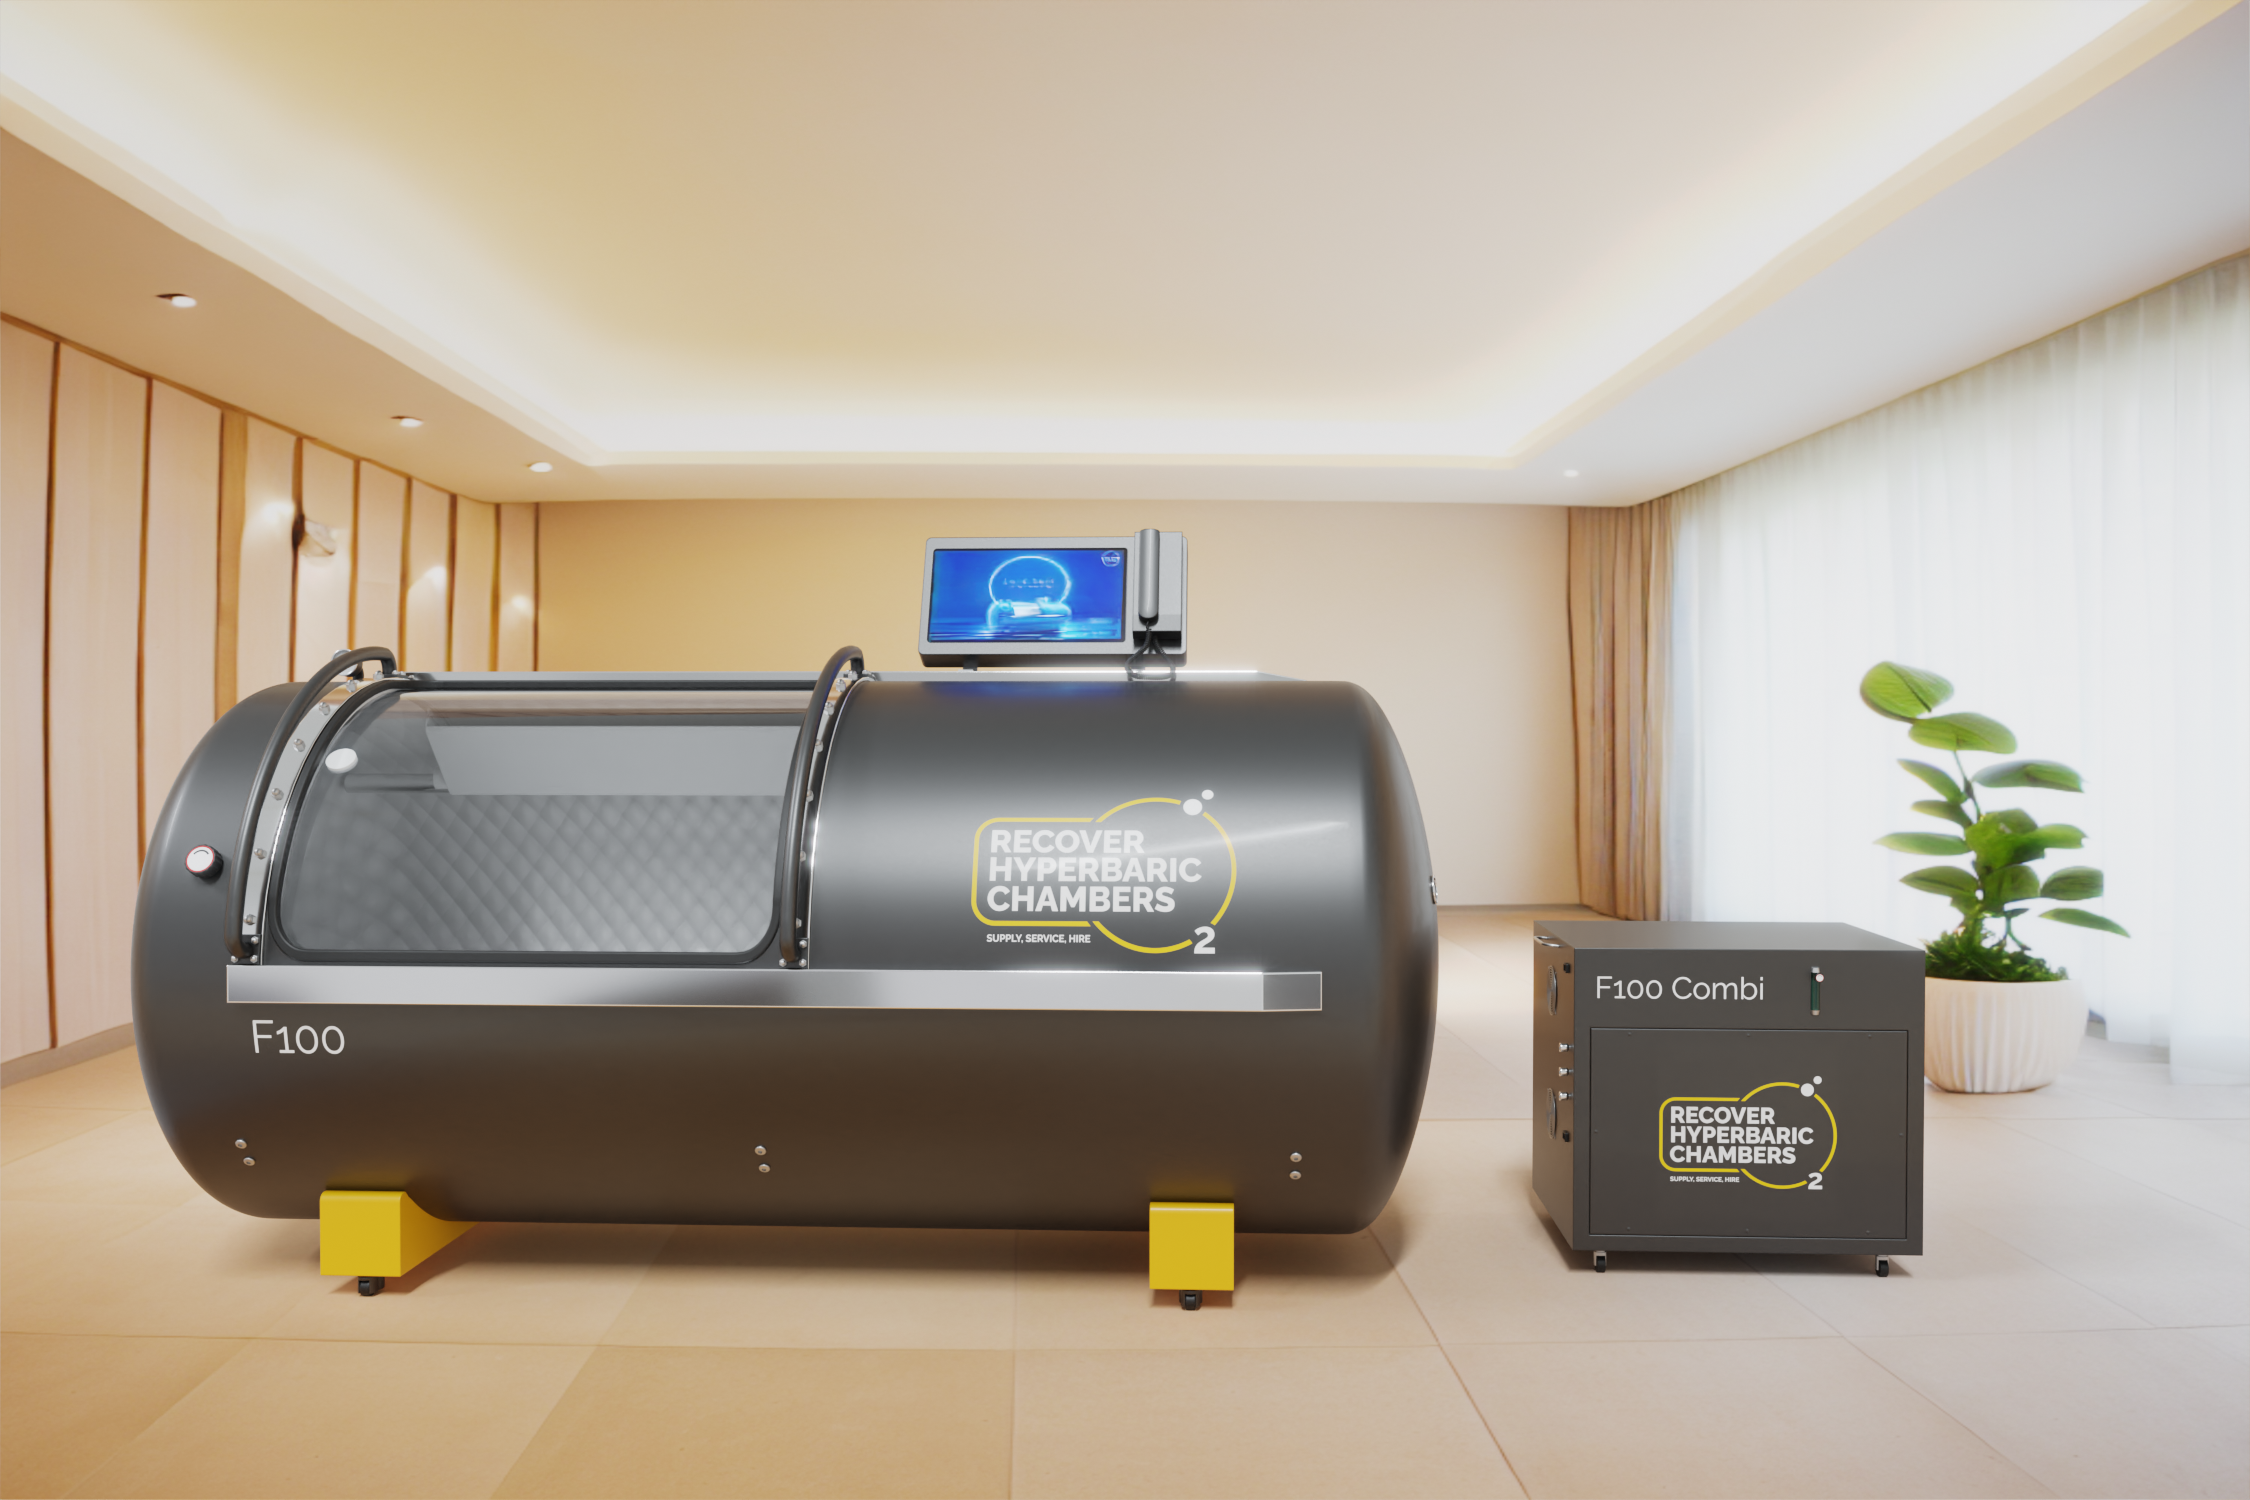 Hyperbaric Chamber | Recover F100 Steel Chamber - Buy Hyperbaric Chamber | Recover Hyperbaric Chambers